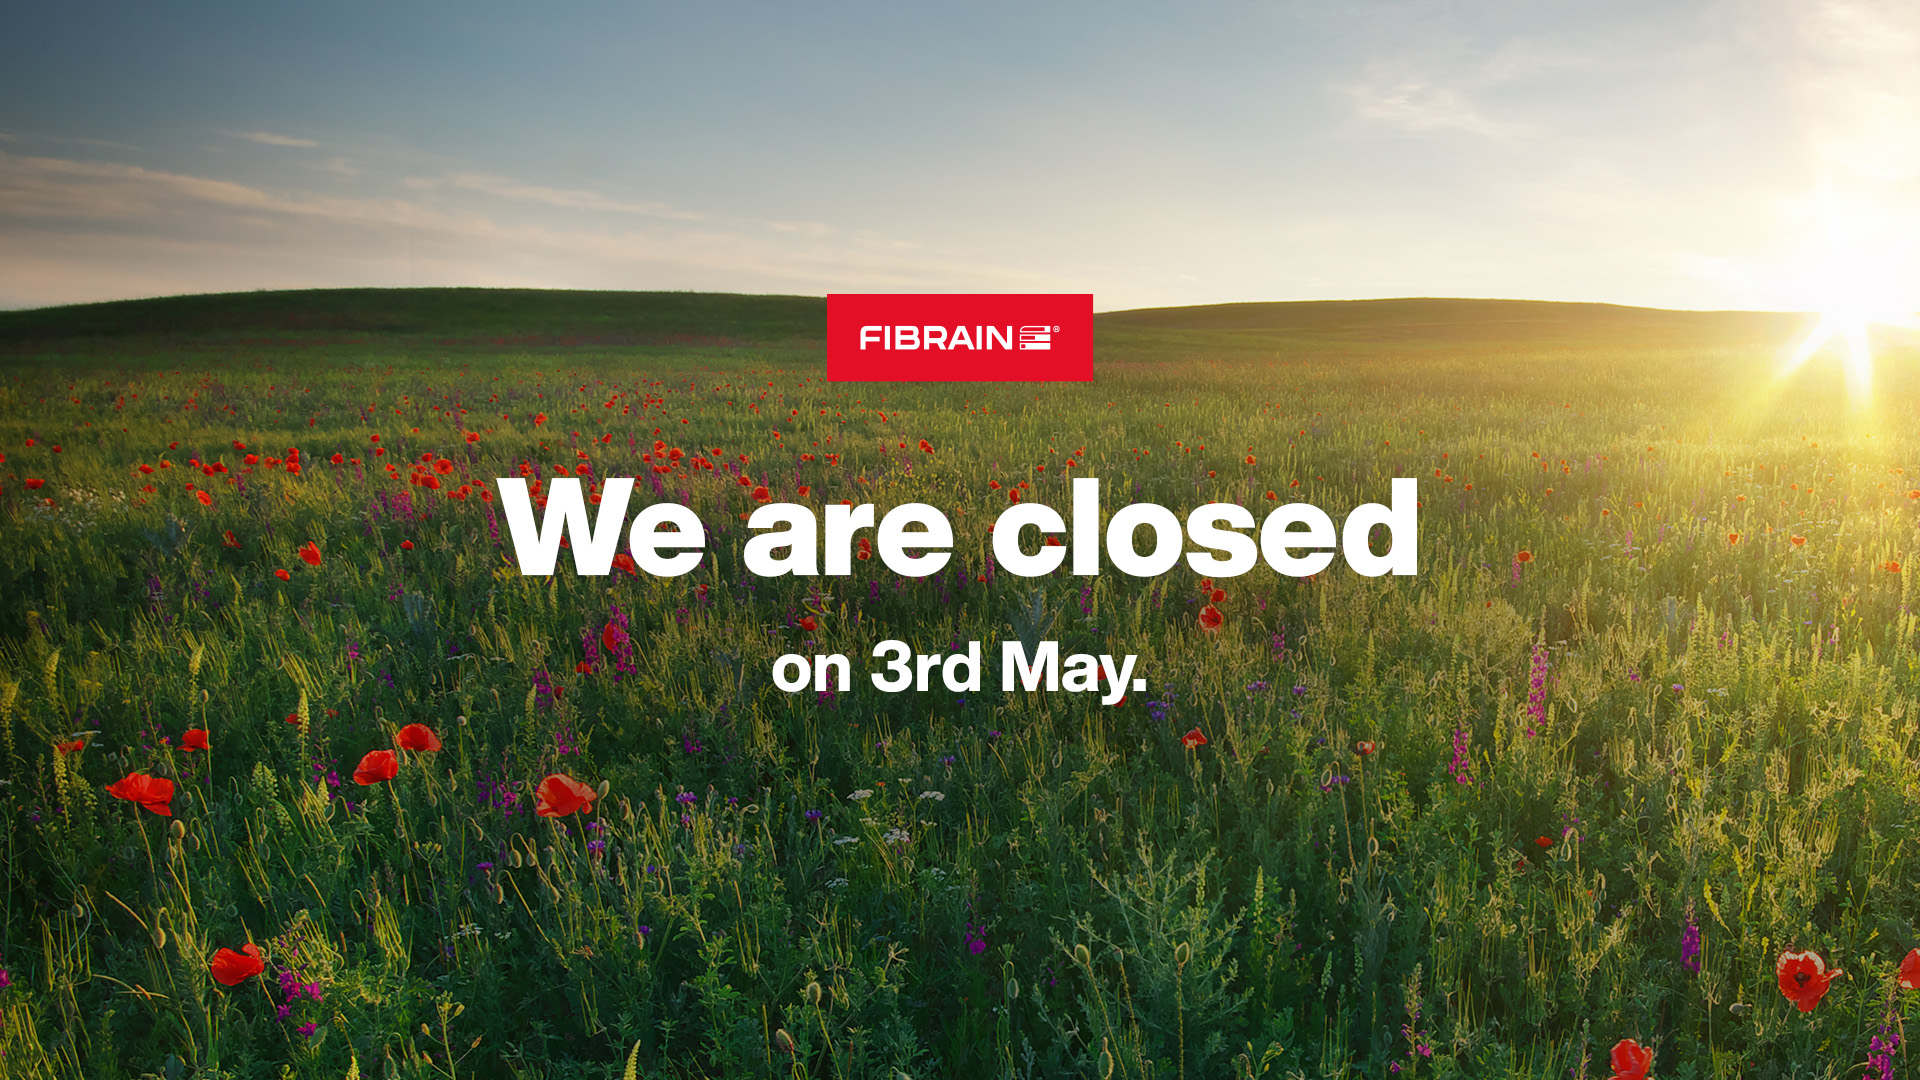 FIBRAIN is closed on 3rd May